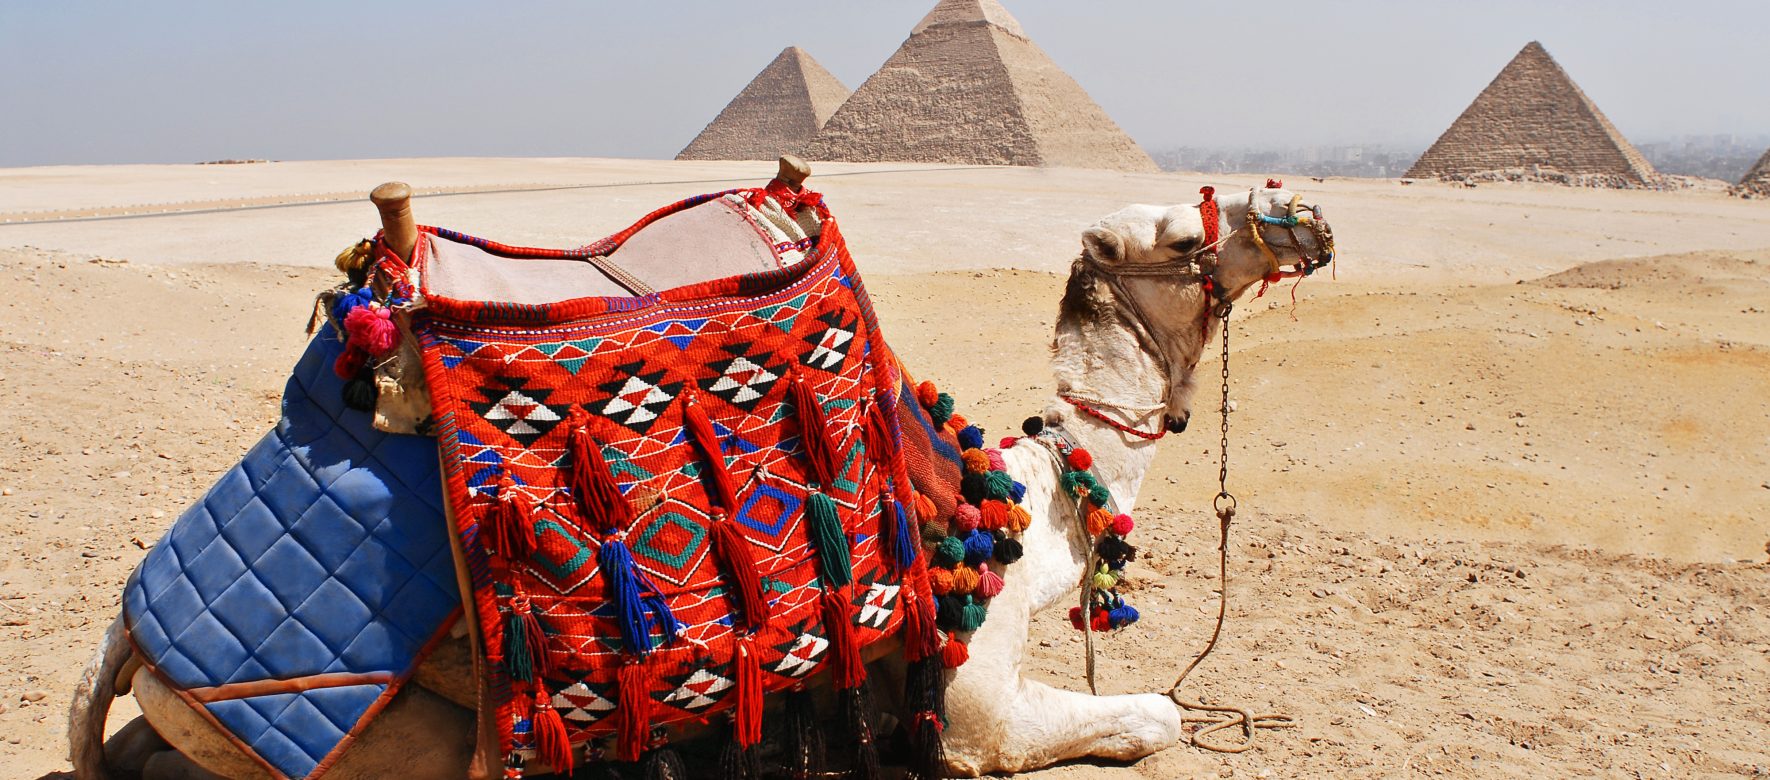 After Tunisia, tourism is now recovering in Egypt 2